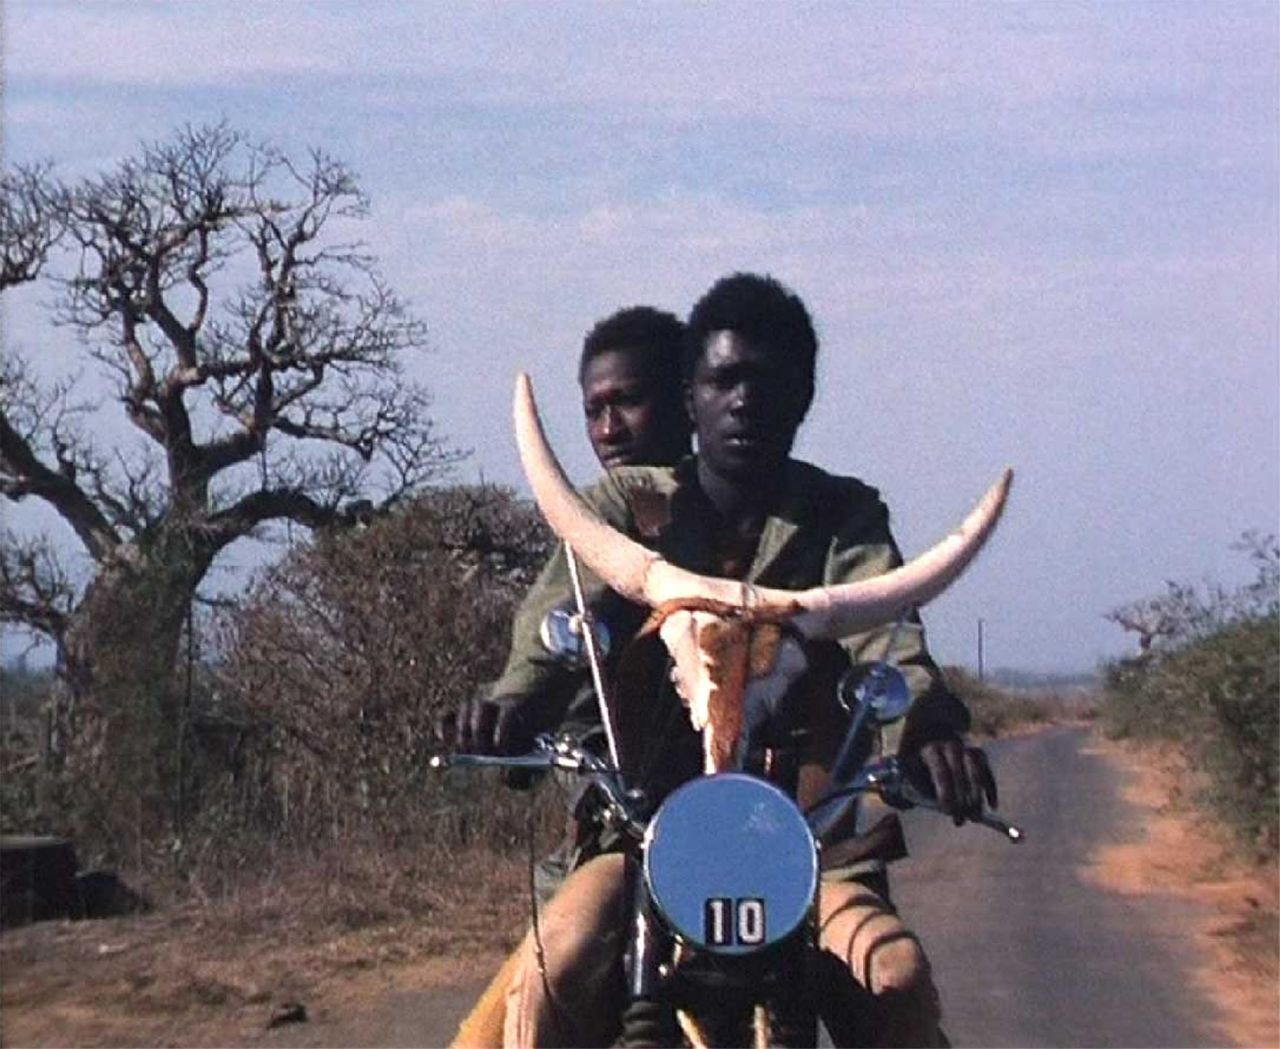 In African cinema, there are names that resonate like charms. They have something of a talismanic overtone to them. Djibril Diop Mambety is one of them. Mambety's films resonate more with surrealism, with the kingdom of dreams, with the realms of madness and excess, in other words, the spaces that push boundaries and approach art and life from original and unusual points of view. To put is schematically, Mambety's cinema eschews prose for poetry, classicism for experimentalism, wisdom for rebellion. With "Touki Bouki," one of cinema's genuine poets offers us a love letter on the beauty and unbounded possibilities of youth  